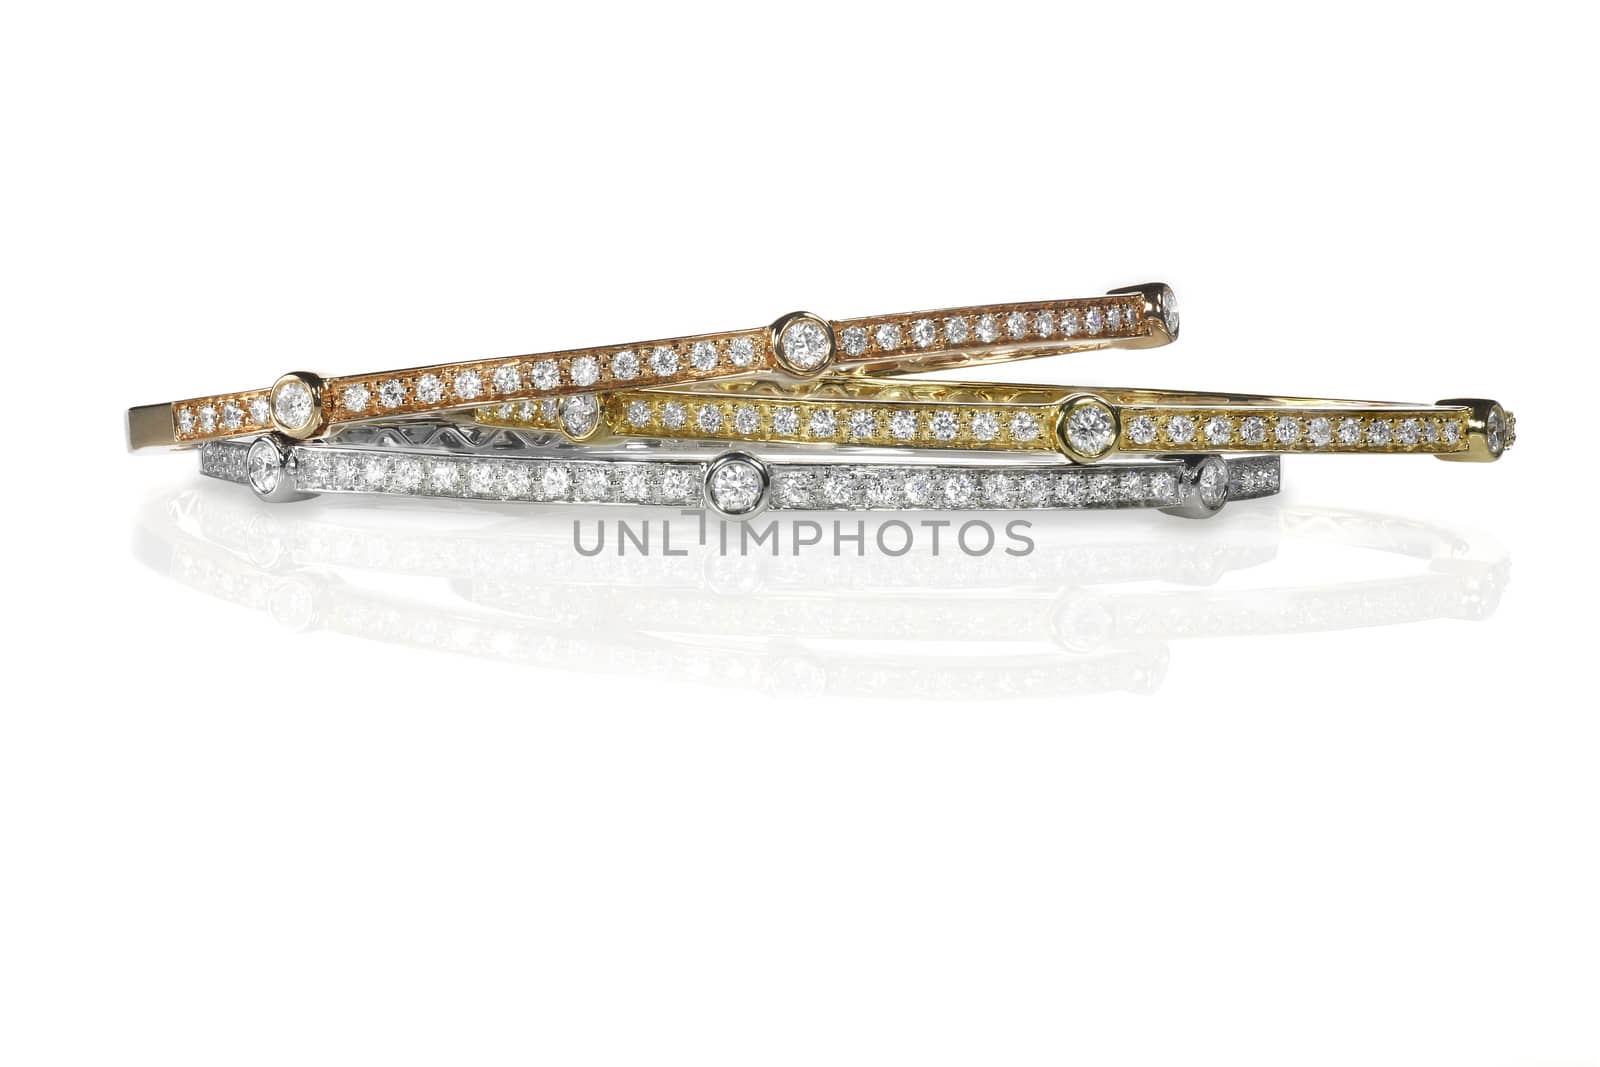 Set of three colored gold and diamond bracelets stacked by fruitcocktail